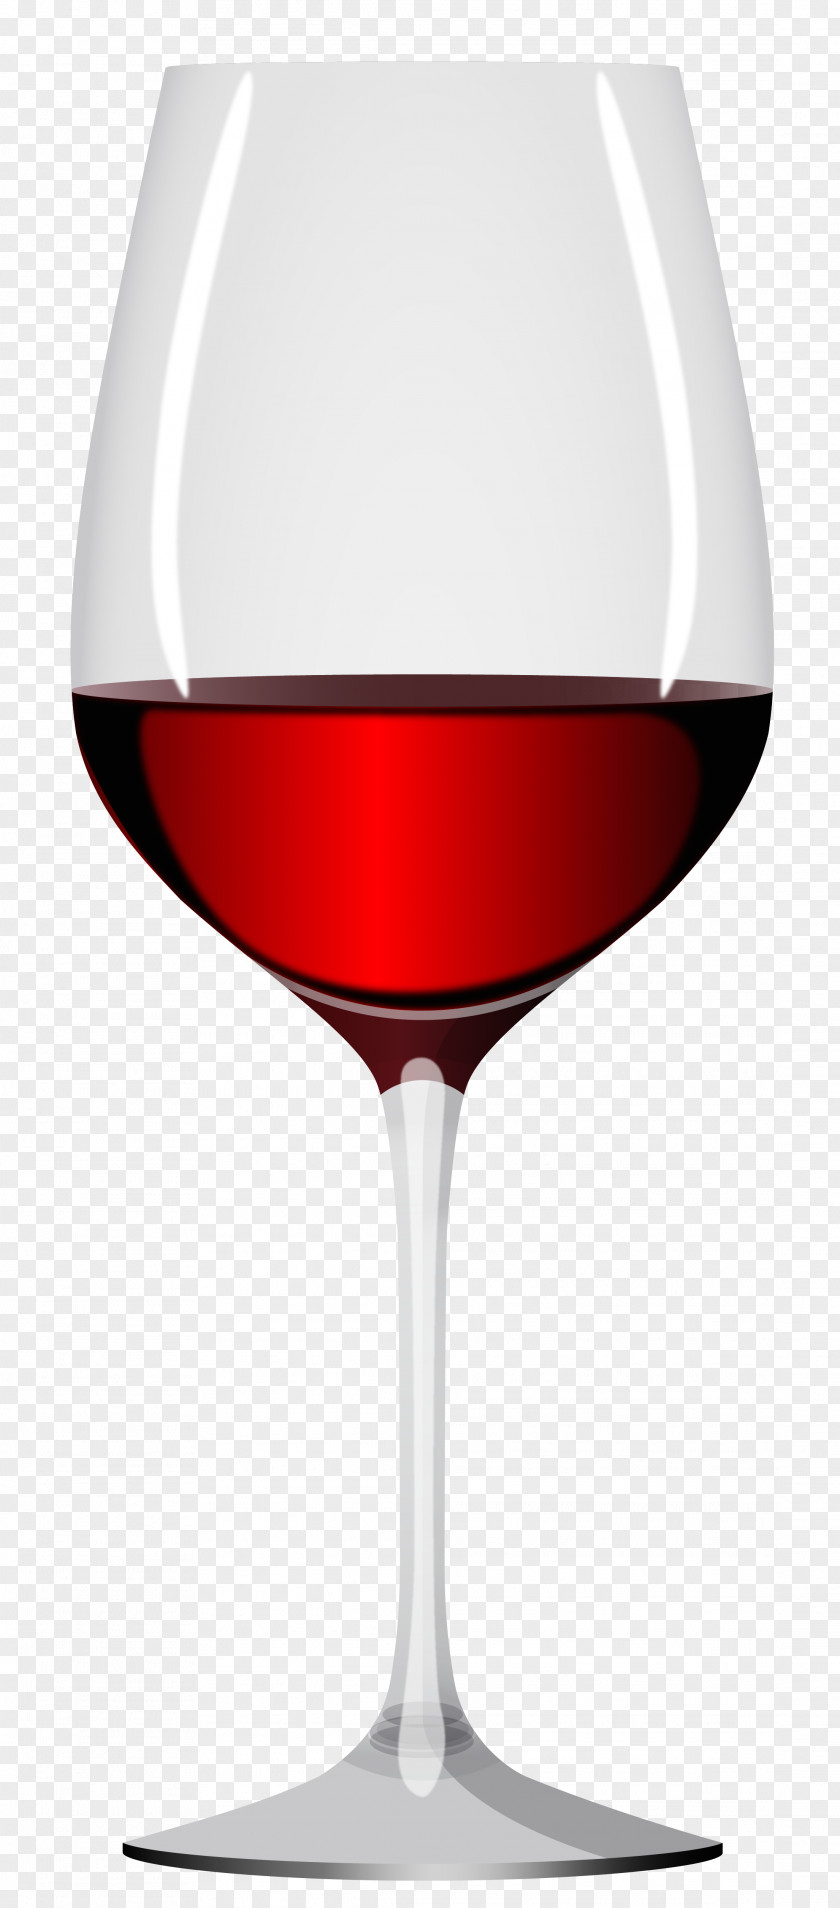 Glass Of Red Wine Clipart Image Champagne Clip Art PNG